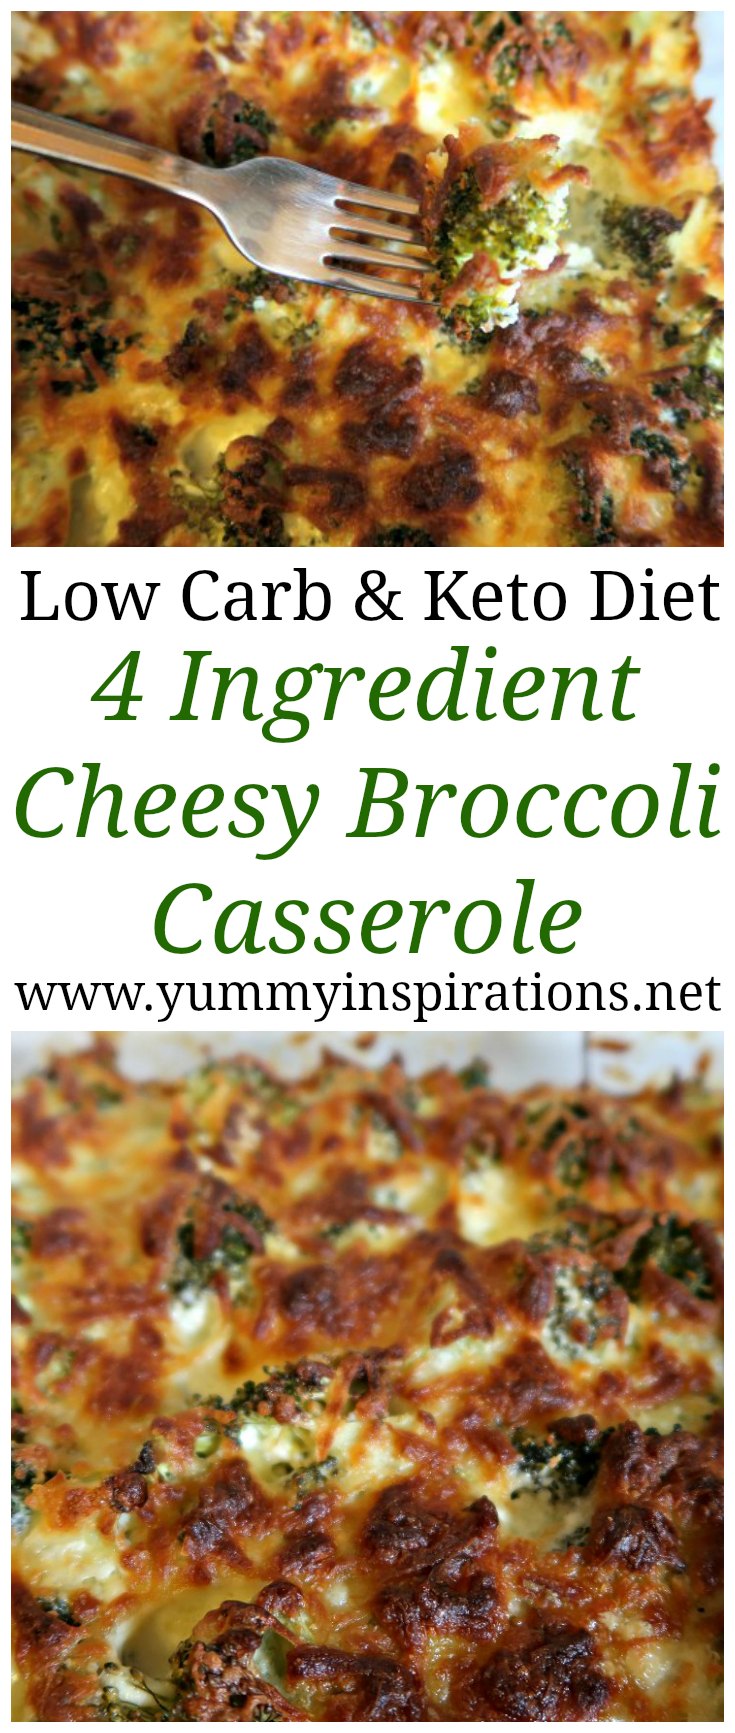 Keto Broccoli Casserole Recipe - Easy low carb broccoli bake recipes - great idea for dinner or a Ketogenic Diet friendly side dish. Loaded with cheese and only 4 ingredients.